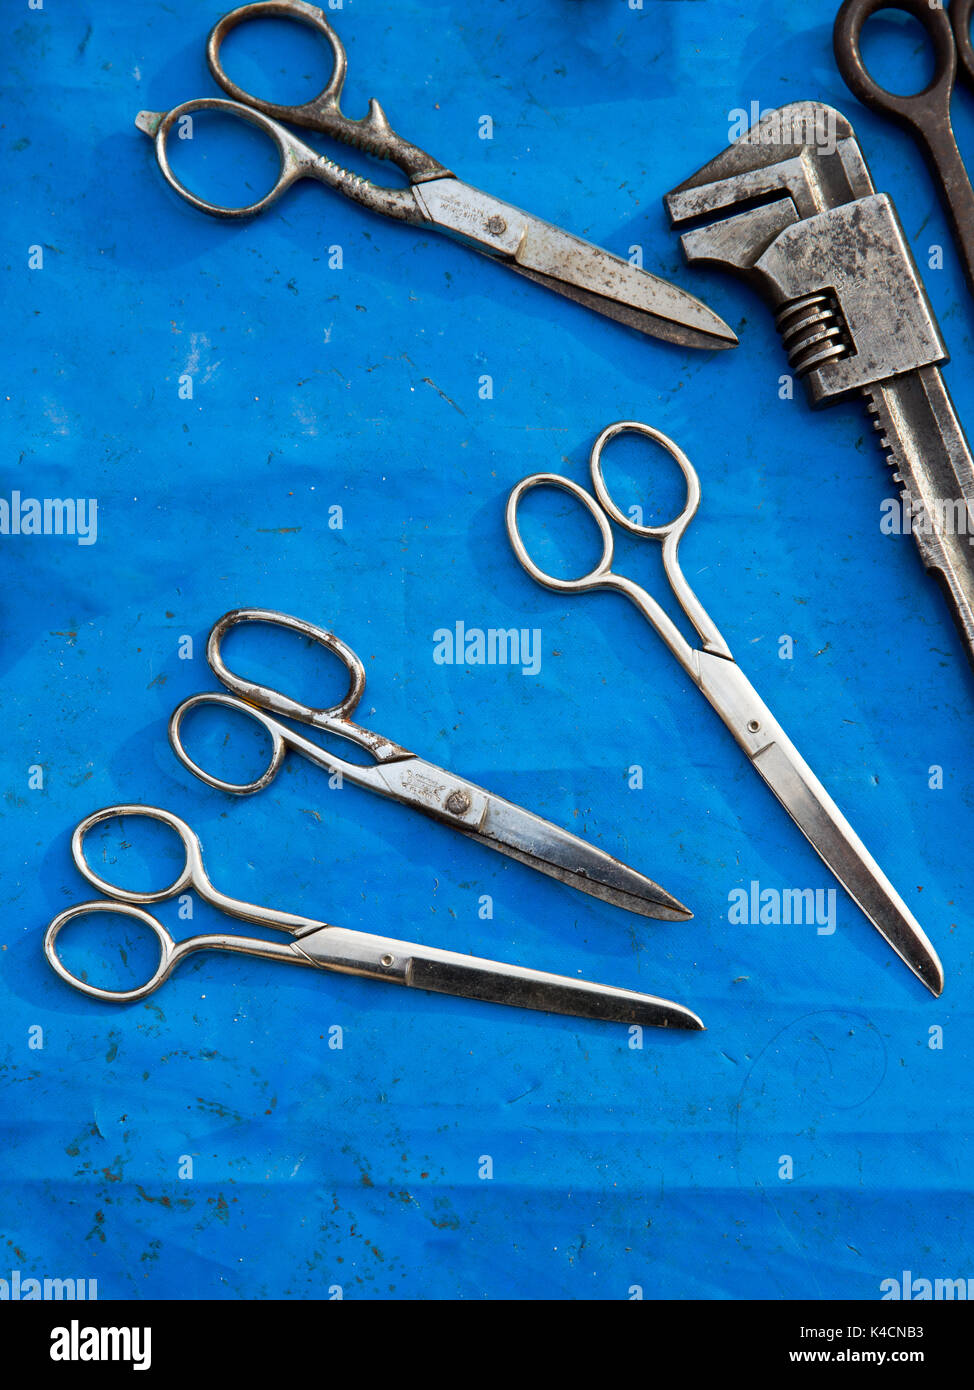 Scissors And Tools On Blue Cloth Stock Photo